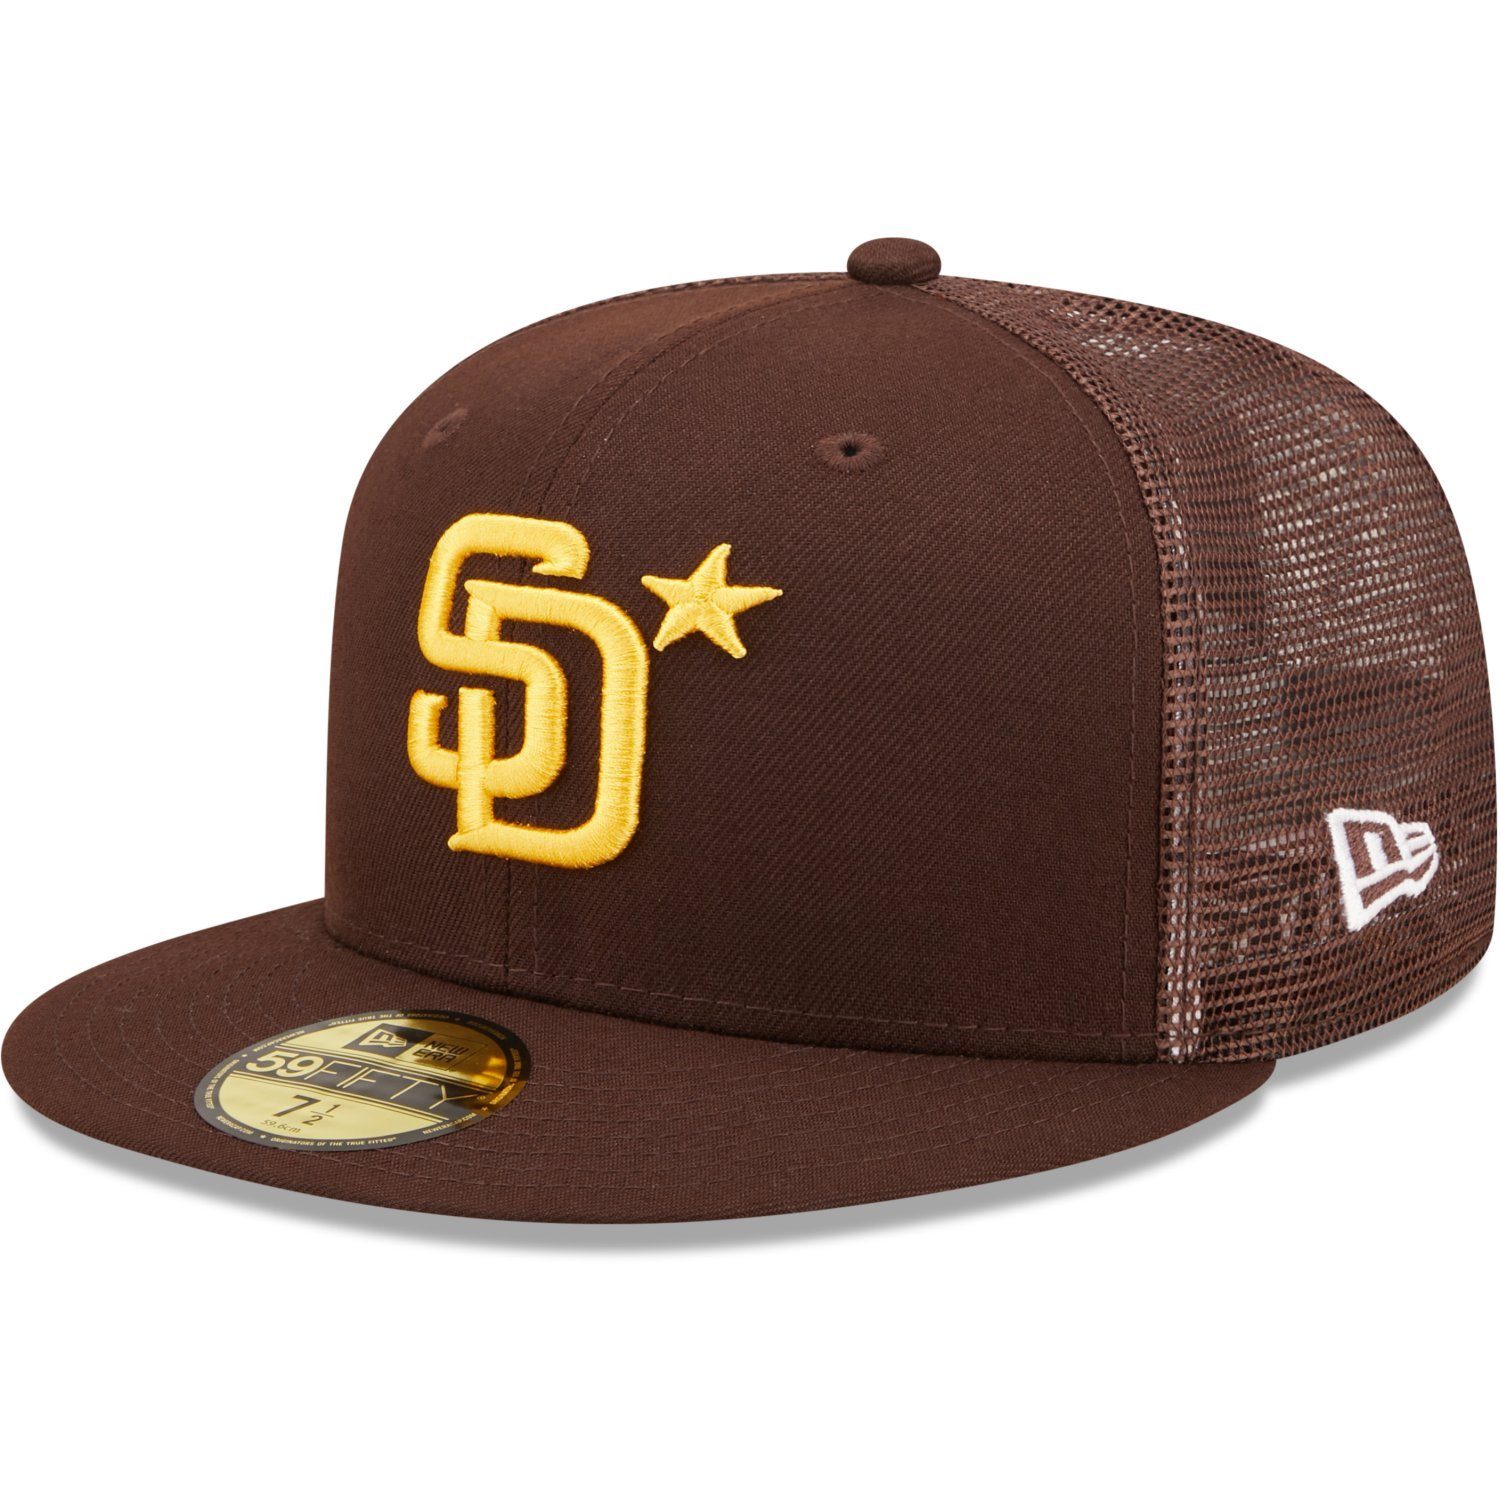 New Era Cap ALLSTAR Padres Fitted Diego 59Fifty GAME San